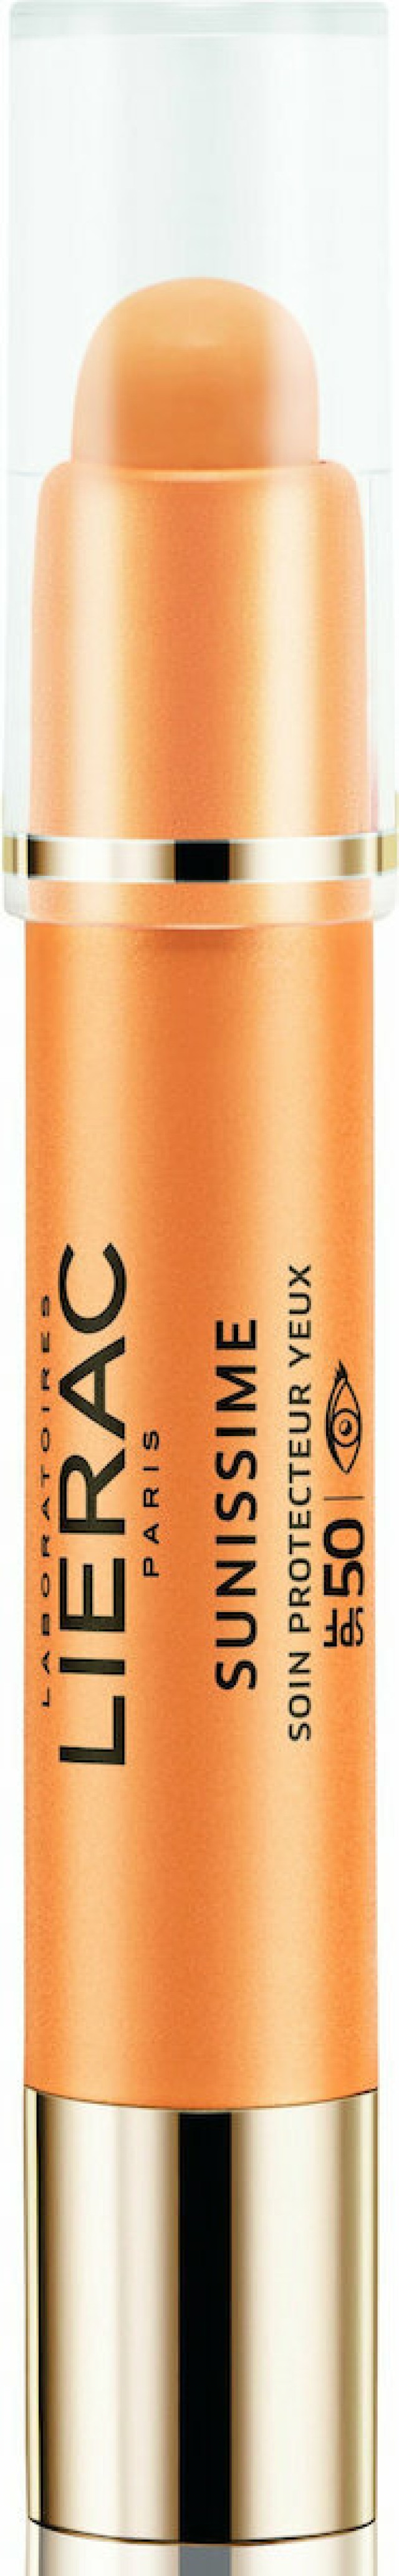 Lierac Sunissime Protective Eye Care Anti-Age Αντηλιακό Stick Ματιών Με Χρώμα SPF50 3gr